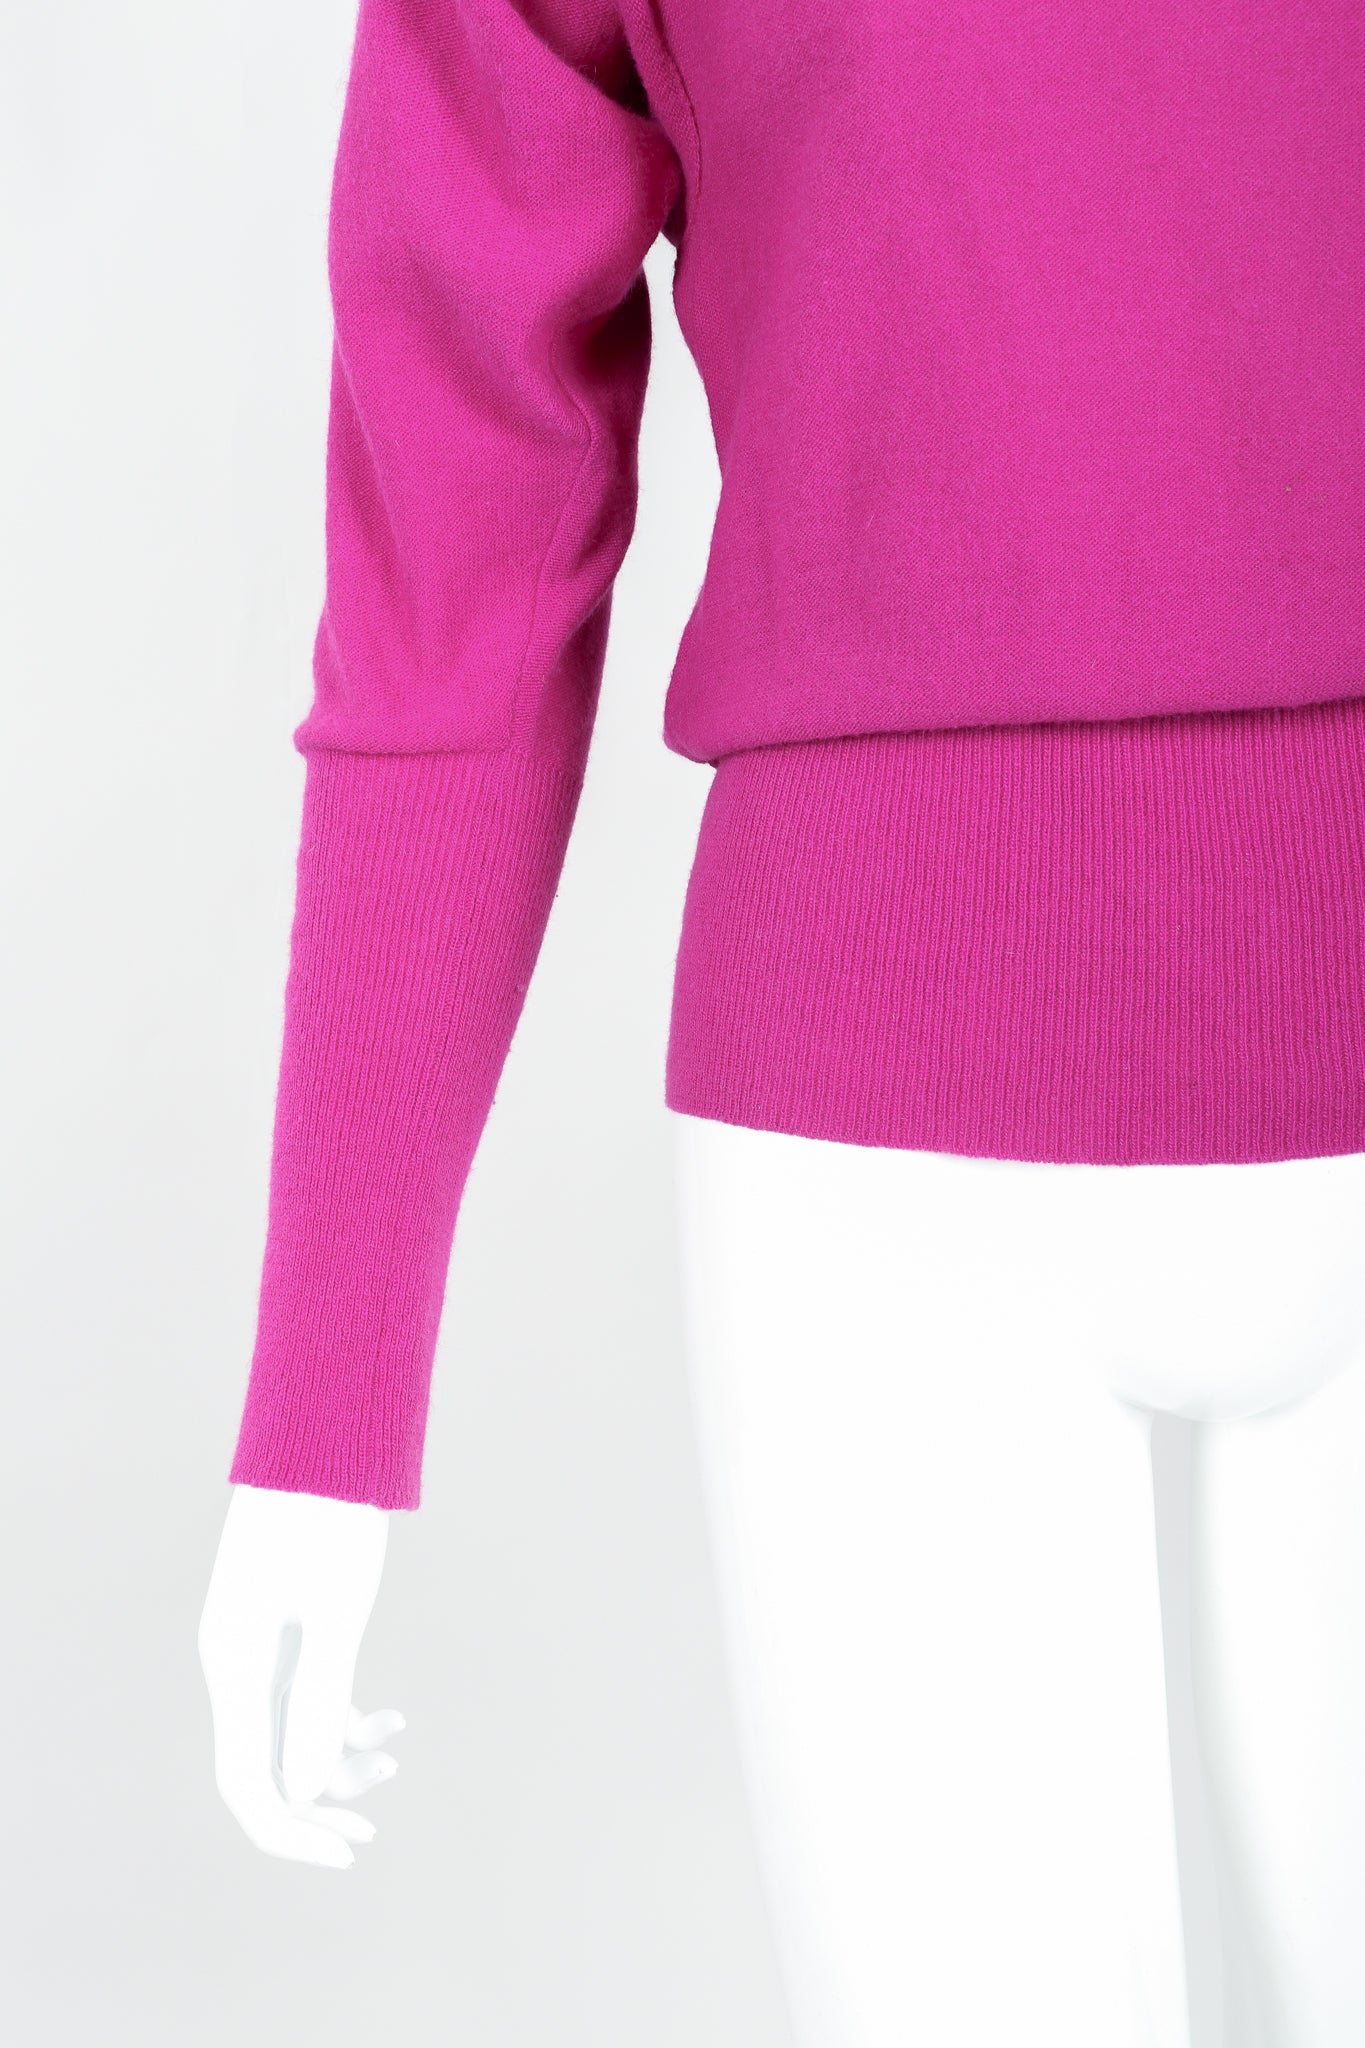 Vintage Sonia Rykiel Magenta Knit Popover Sweater on Mannequin Cuffs and Hem at Recess